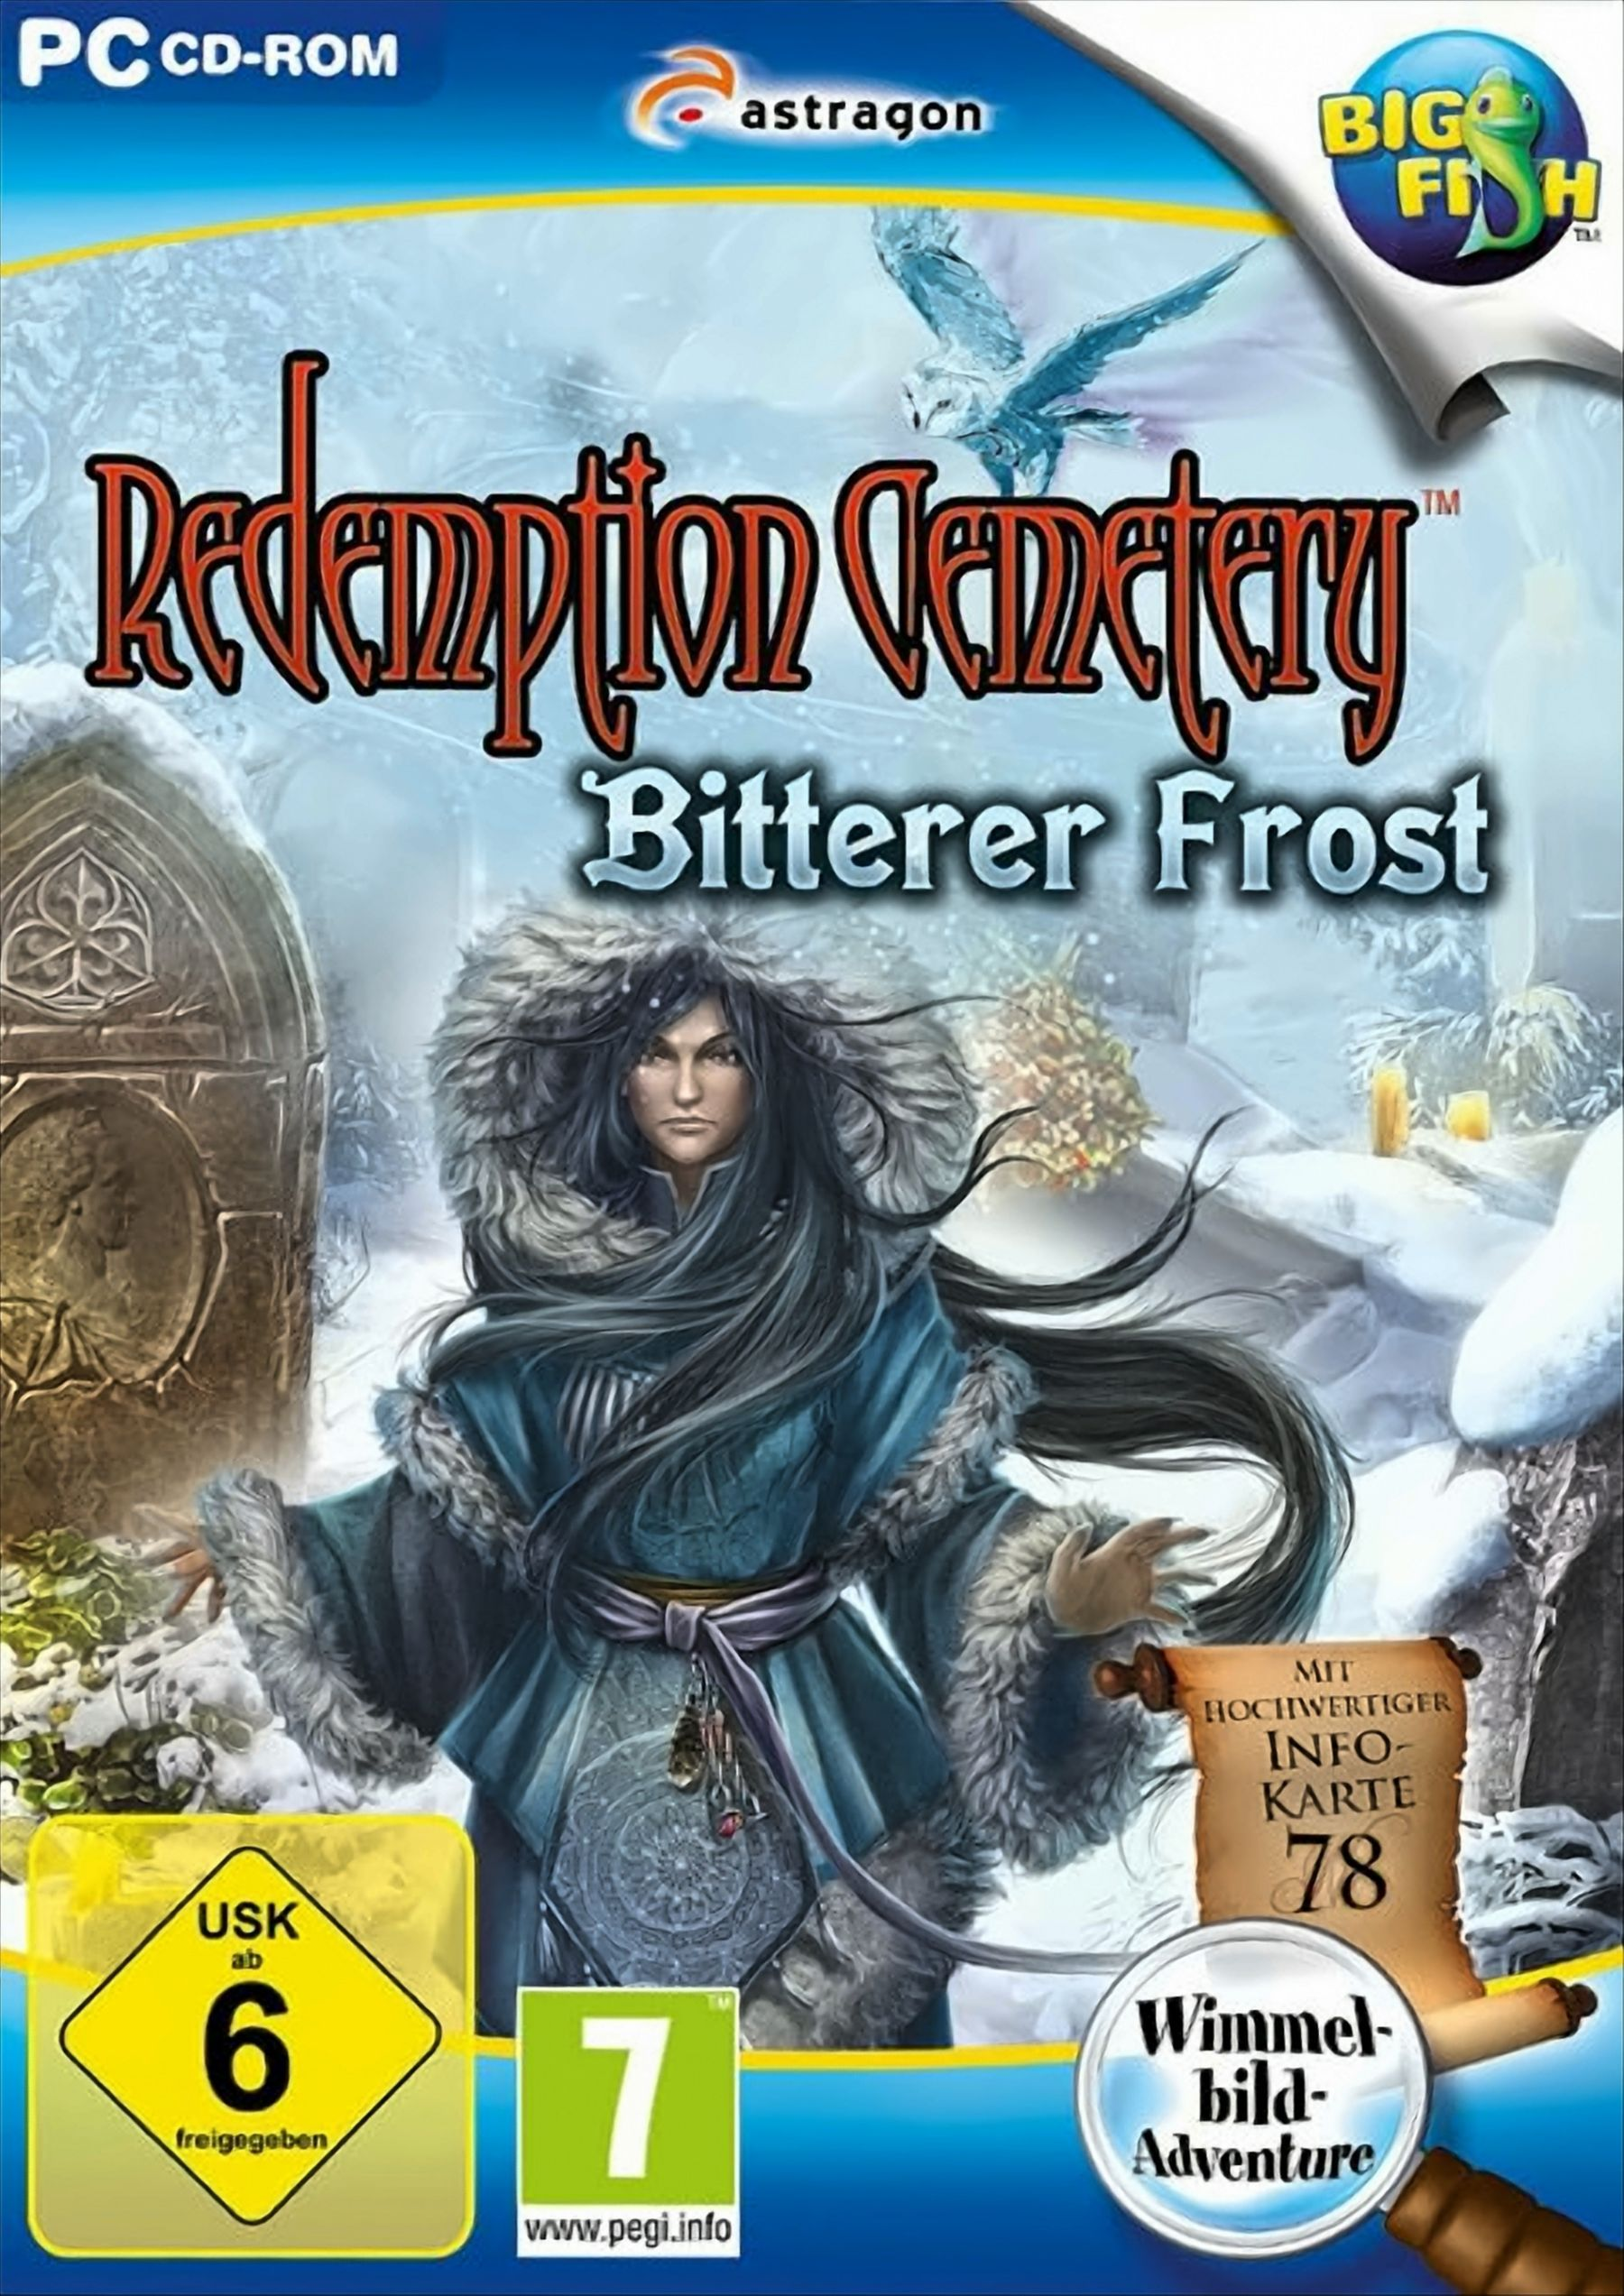 Redemption Cemetery: [PC] Bitterer Frost 